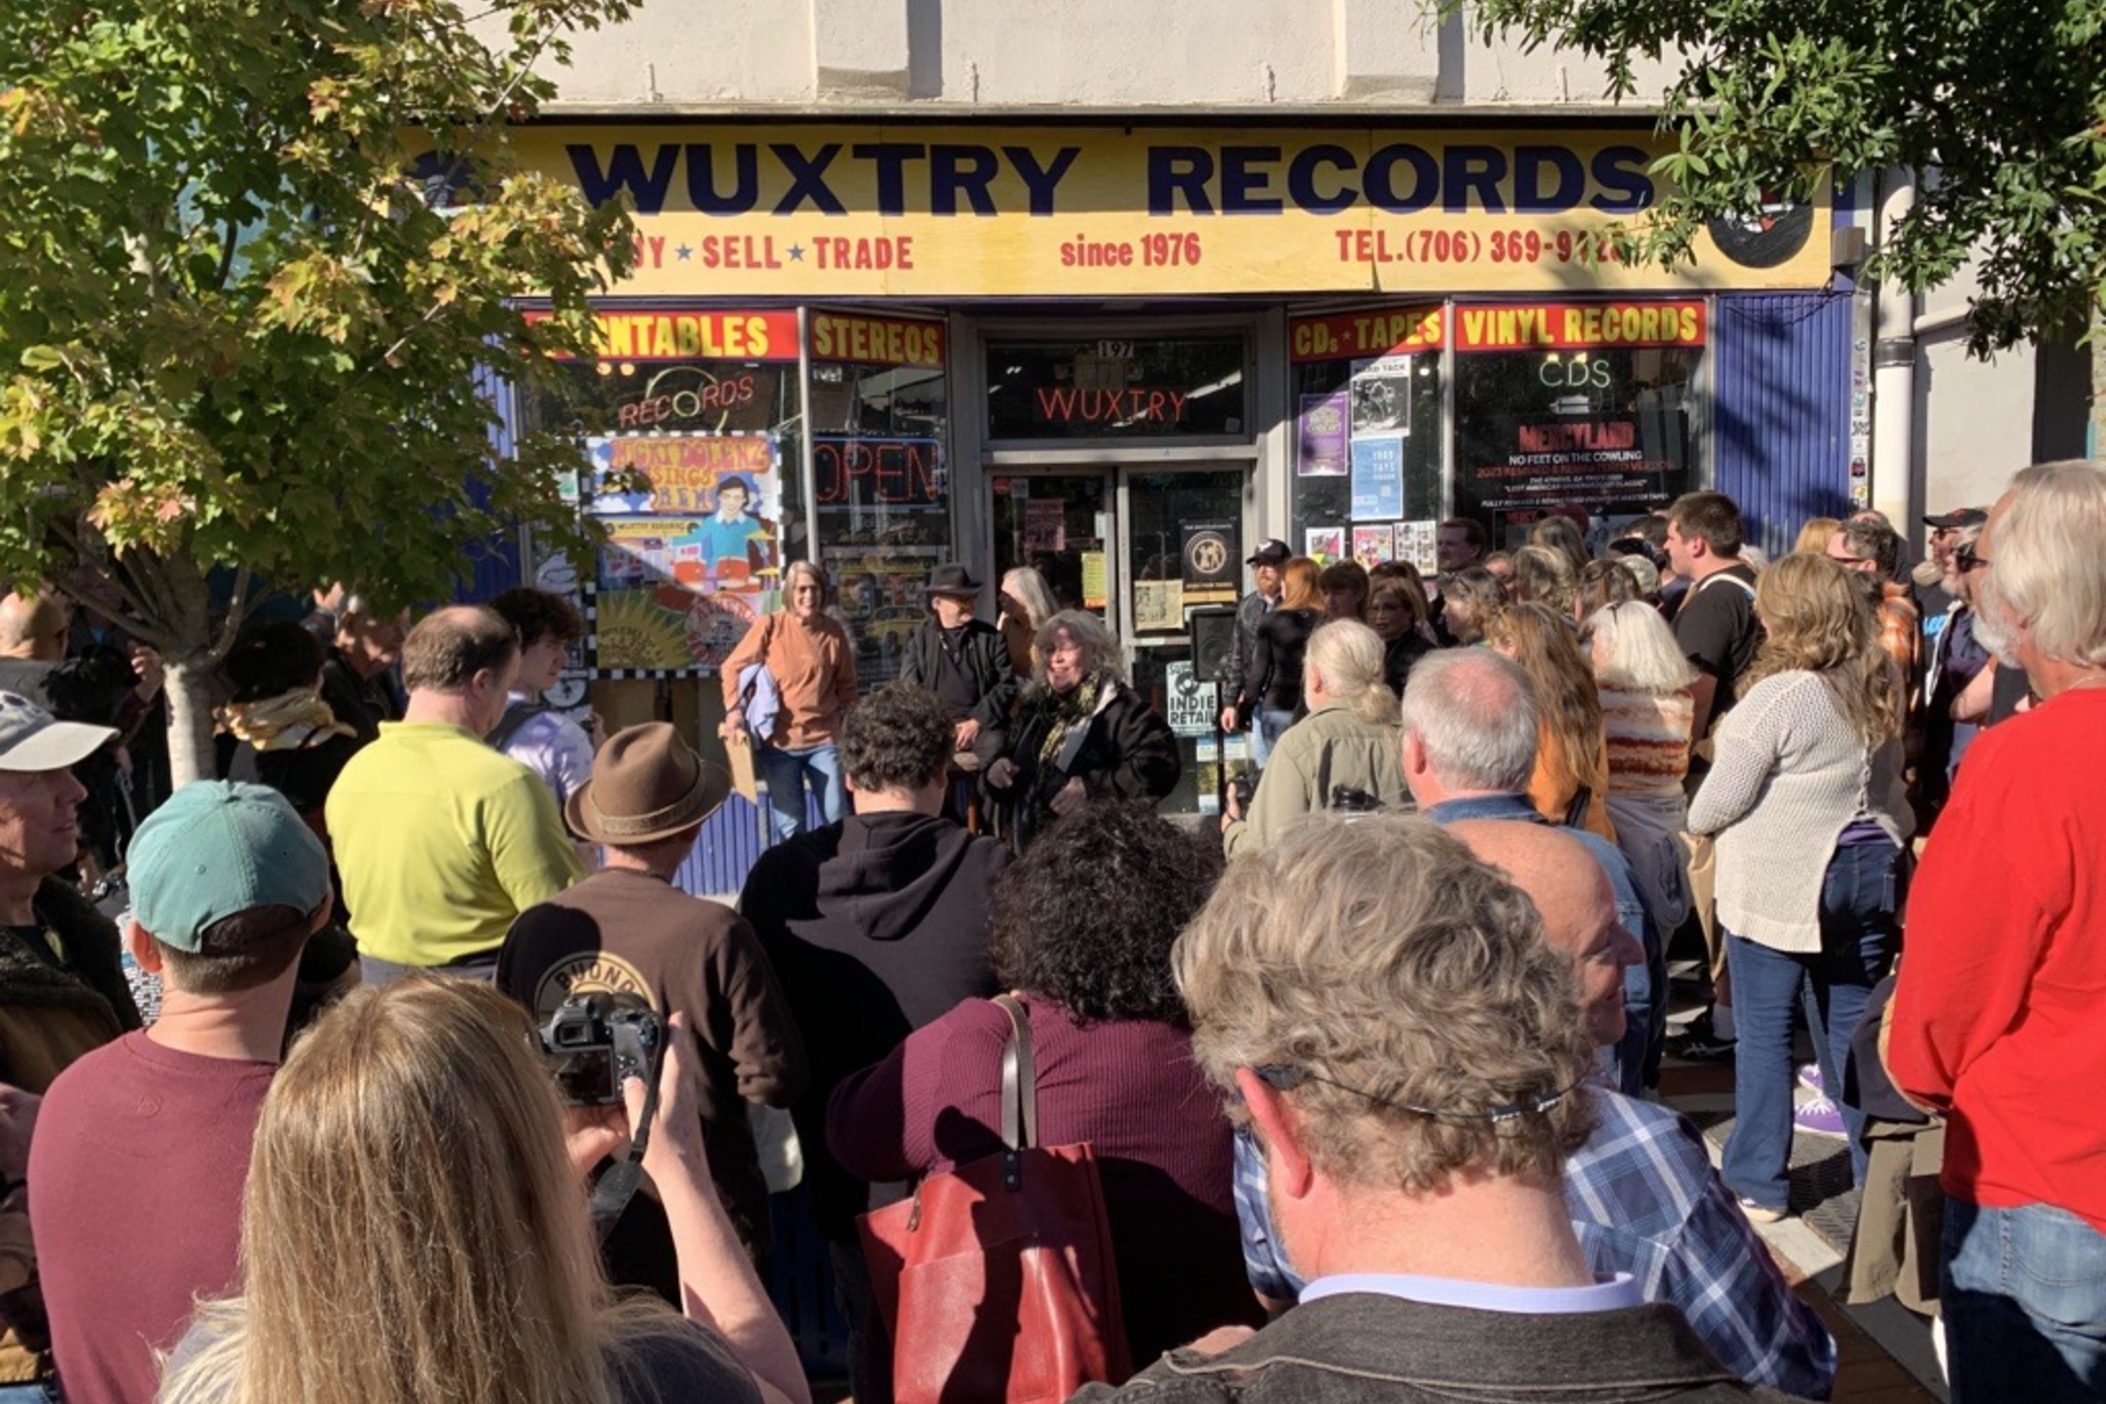 Fans filled a city block in downtown Athens, Ga. on Nov. 3, 2023, to meet Micky Dolenz, a singer with The Monkees who signed copies of his EP of R.E.M. songs. Hometown musicians R.E.M. performed their first show in Athens in 1980.